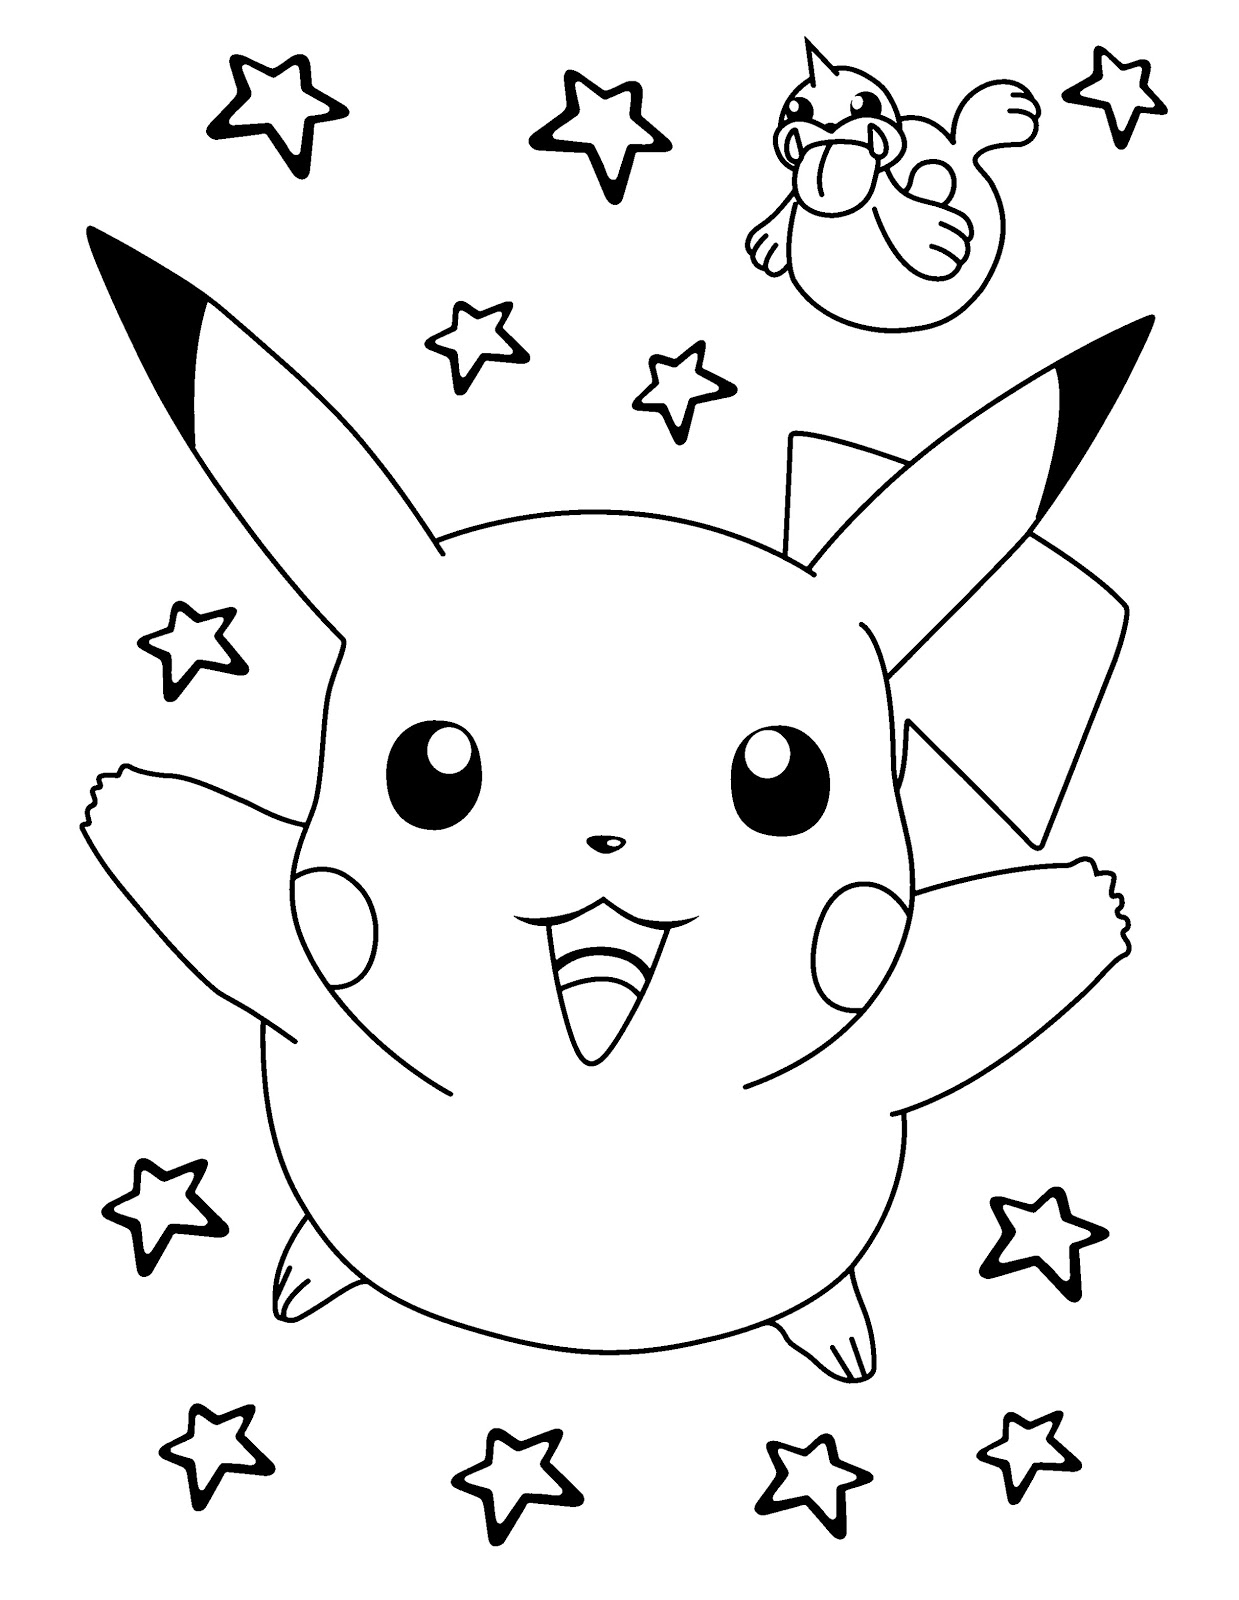 Pokemon Pikachu Coloring Pages Printable - Free Pokemon Coloring Pages